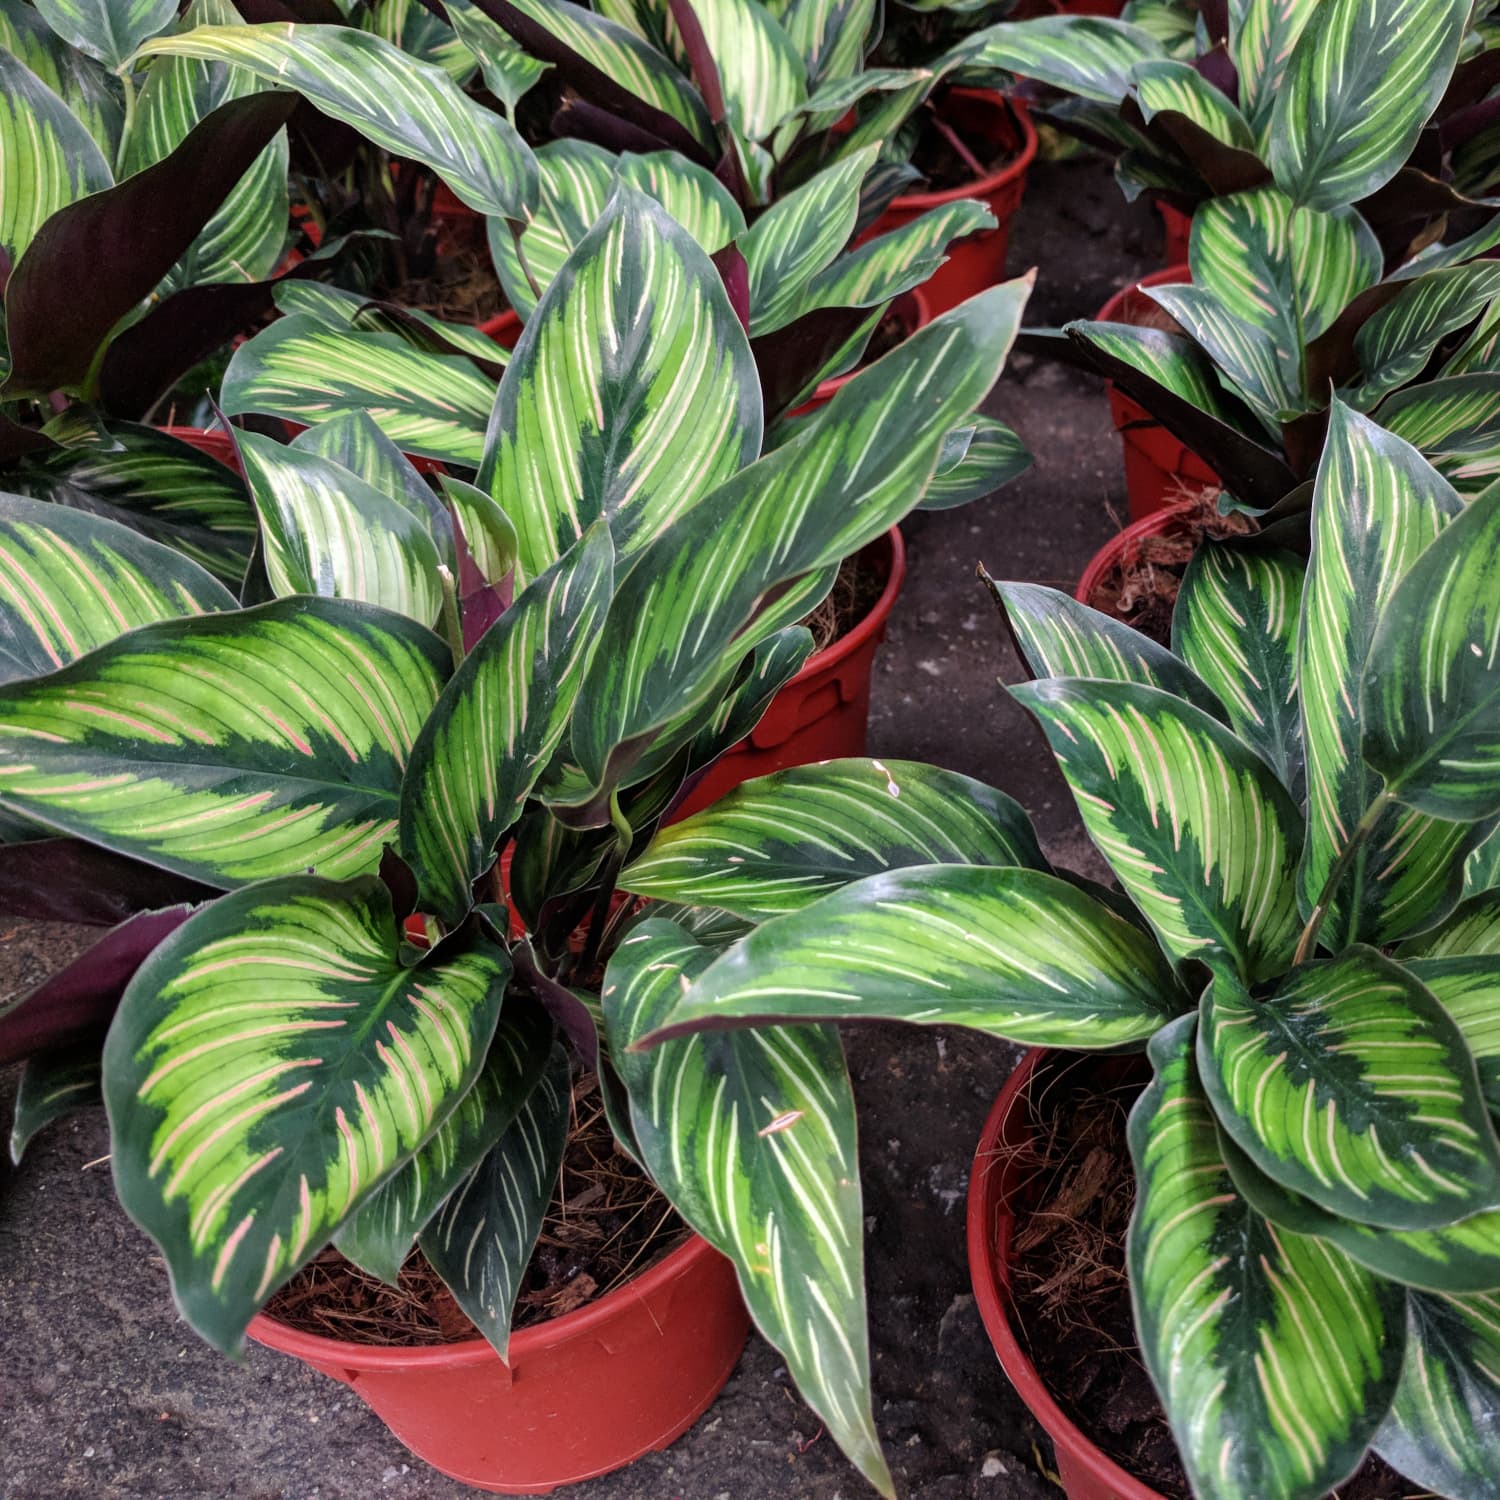 Calathea Plant Care   How to Grow Prayer Plants   Apartment Therapy